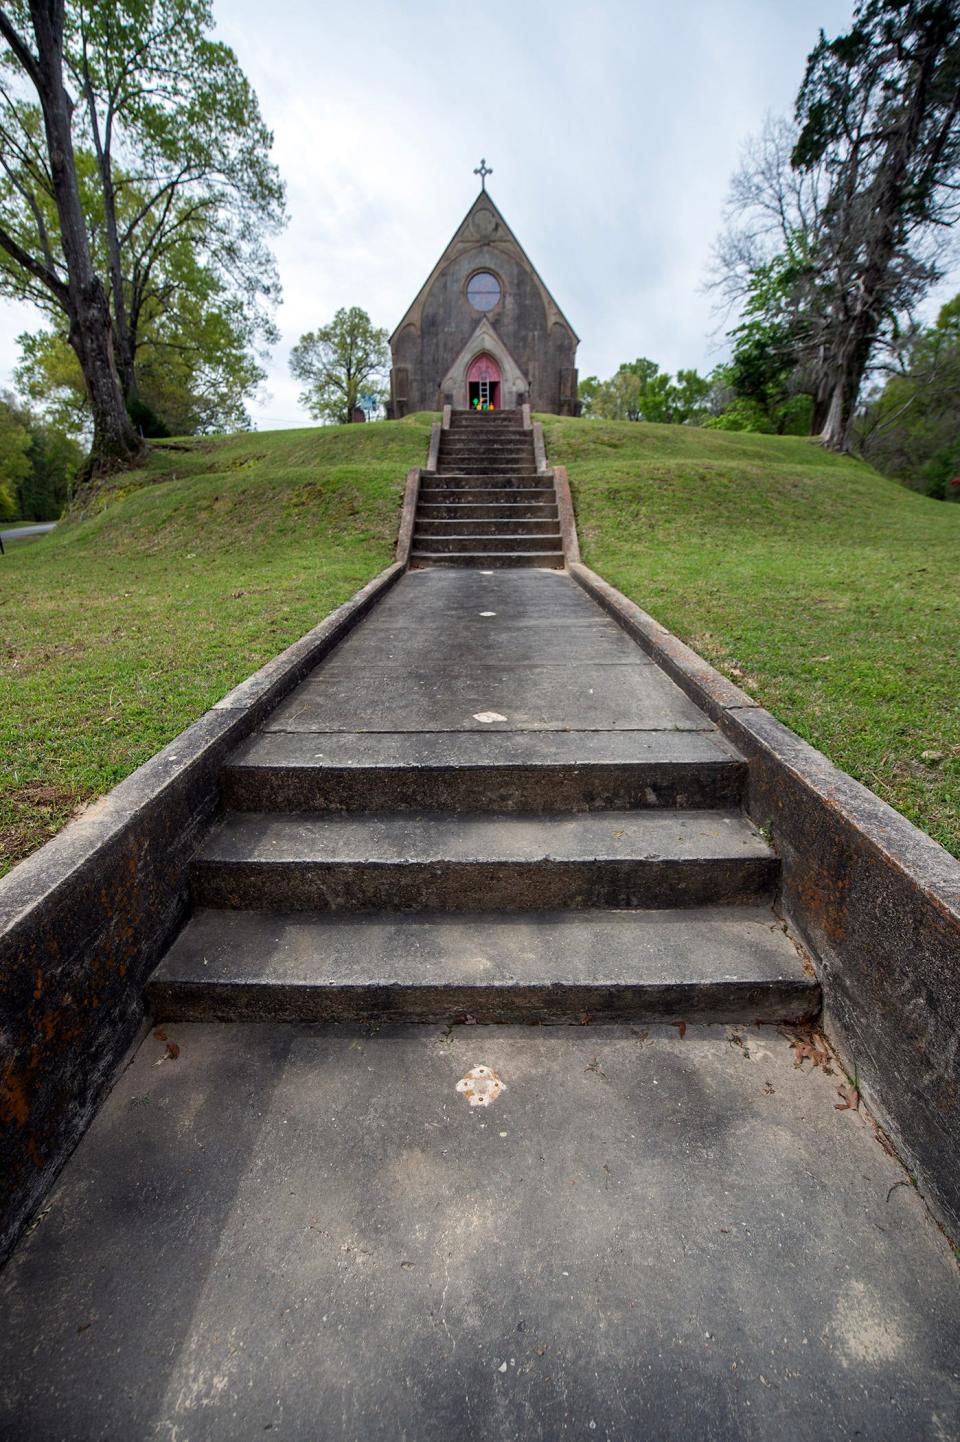 Under renovation, Christ Episcopal Church In Church Hill, Mississippi stands like a beacon atop a terraced hill where it has been since 1857.